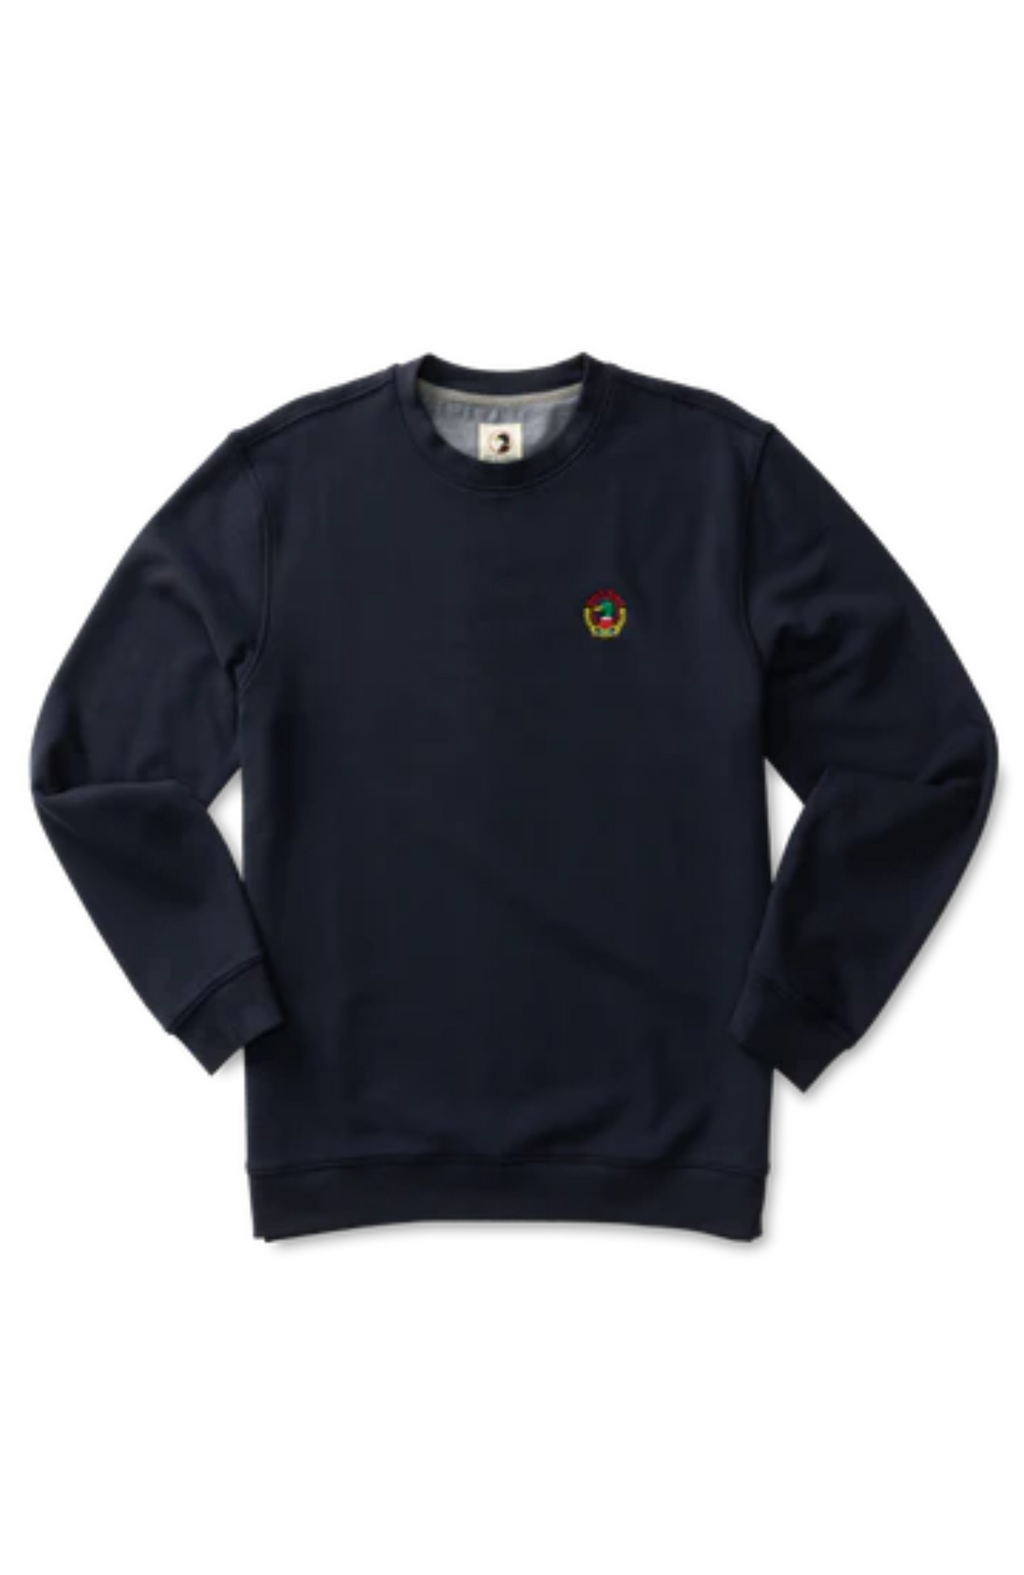 Duck Head - Embroidered Crest Crewneck Pullover